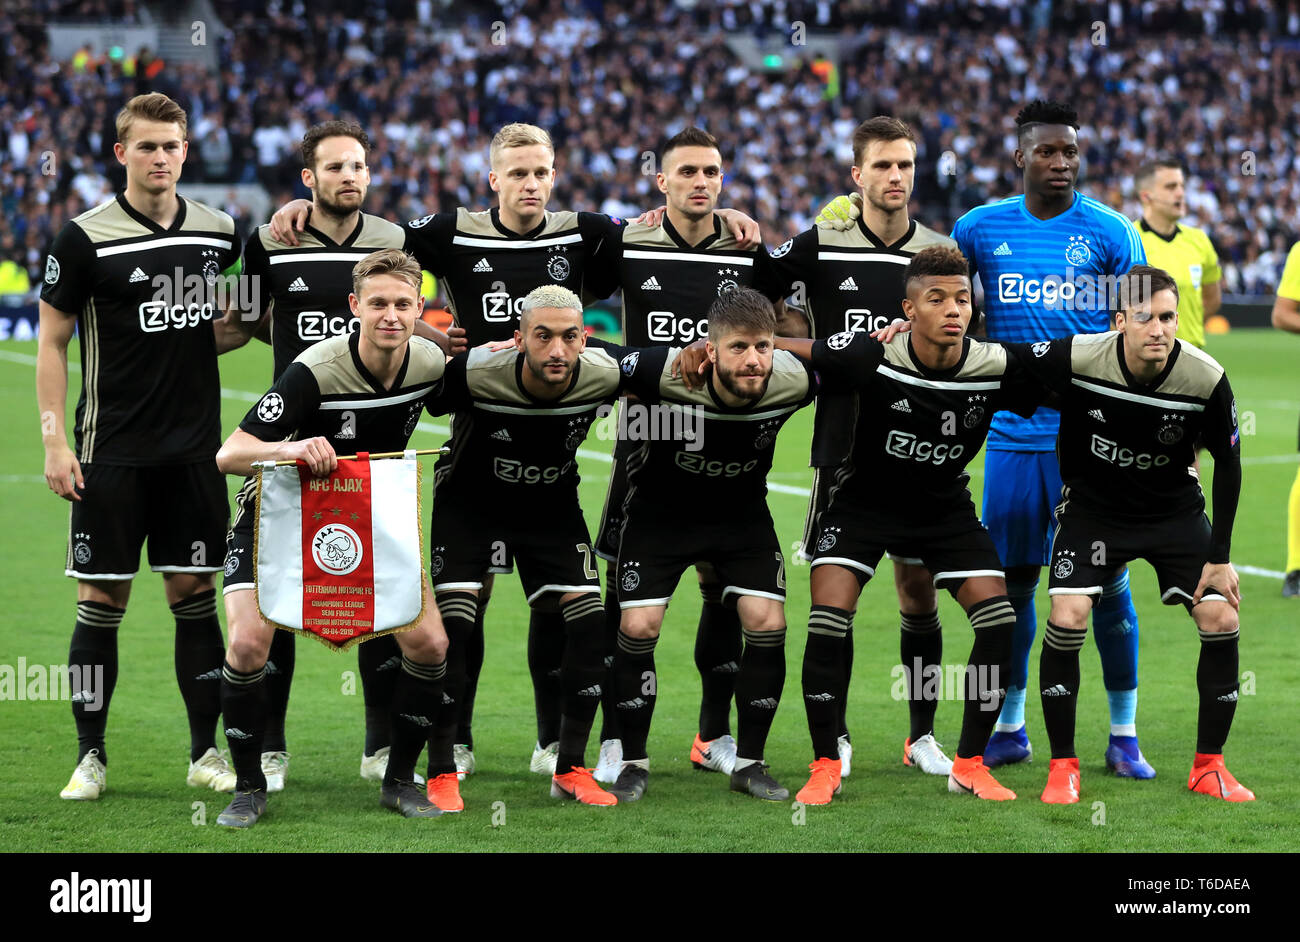 Ajax players pose for a photo ahead of the match, back row (left to right) Matthijs de Ligt, Daley Blind, Donny van de Beek, Dusan Tadic, Joel Veltman and Andre Onana (front row) Frenkie de Jong, Hakim Ziyech, Lasse Schone, David Neres and Nicolas Tagliafico during the Champions League, Semi Final, First Leg at the Tottenham Hotspur Stadium, London. Stock Photo